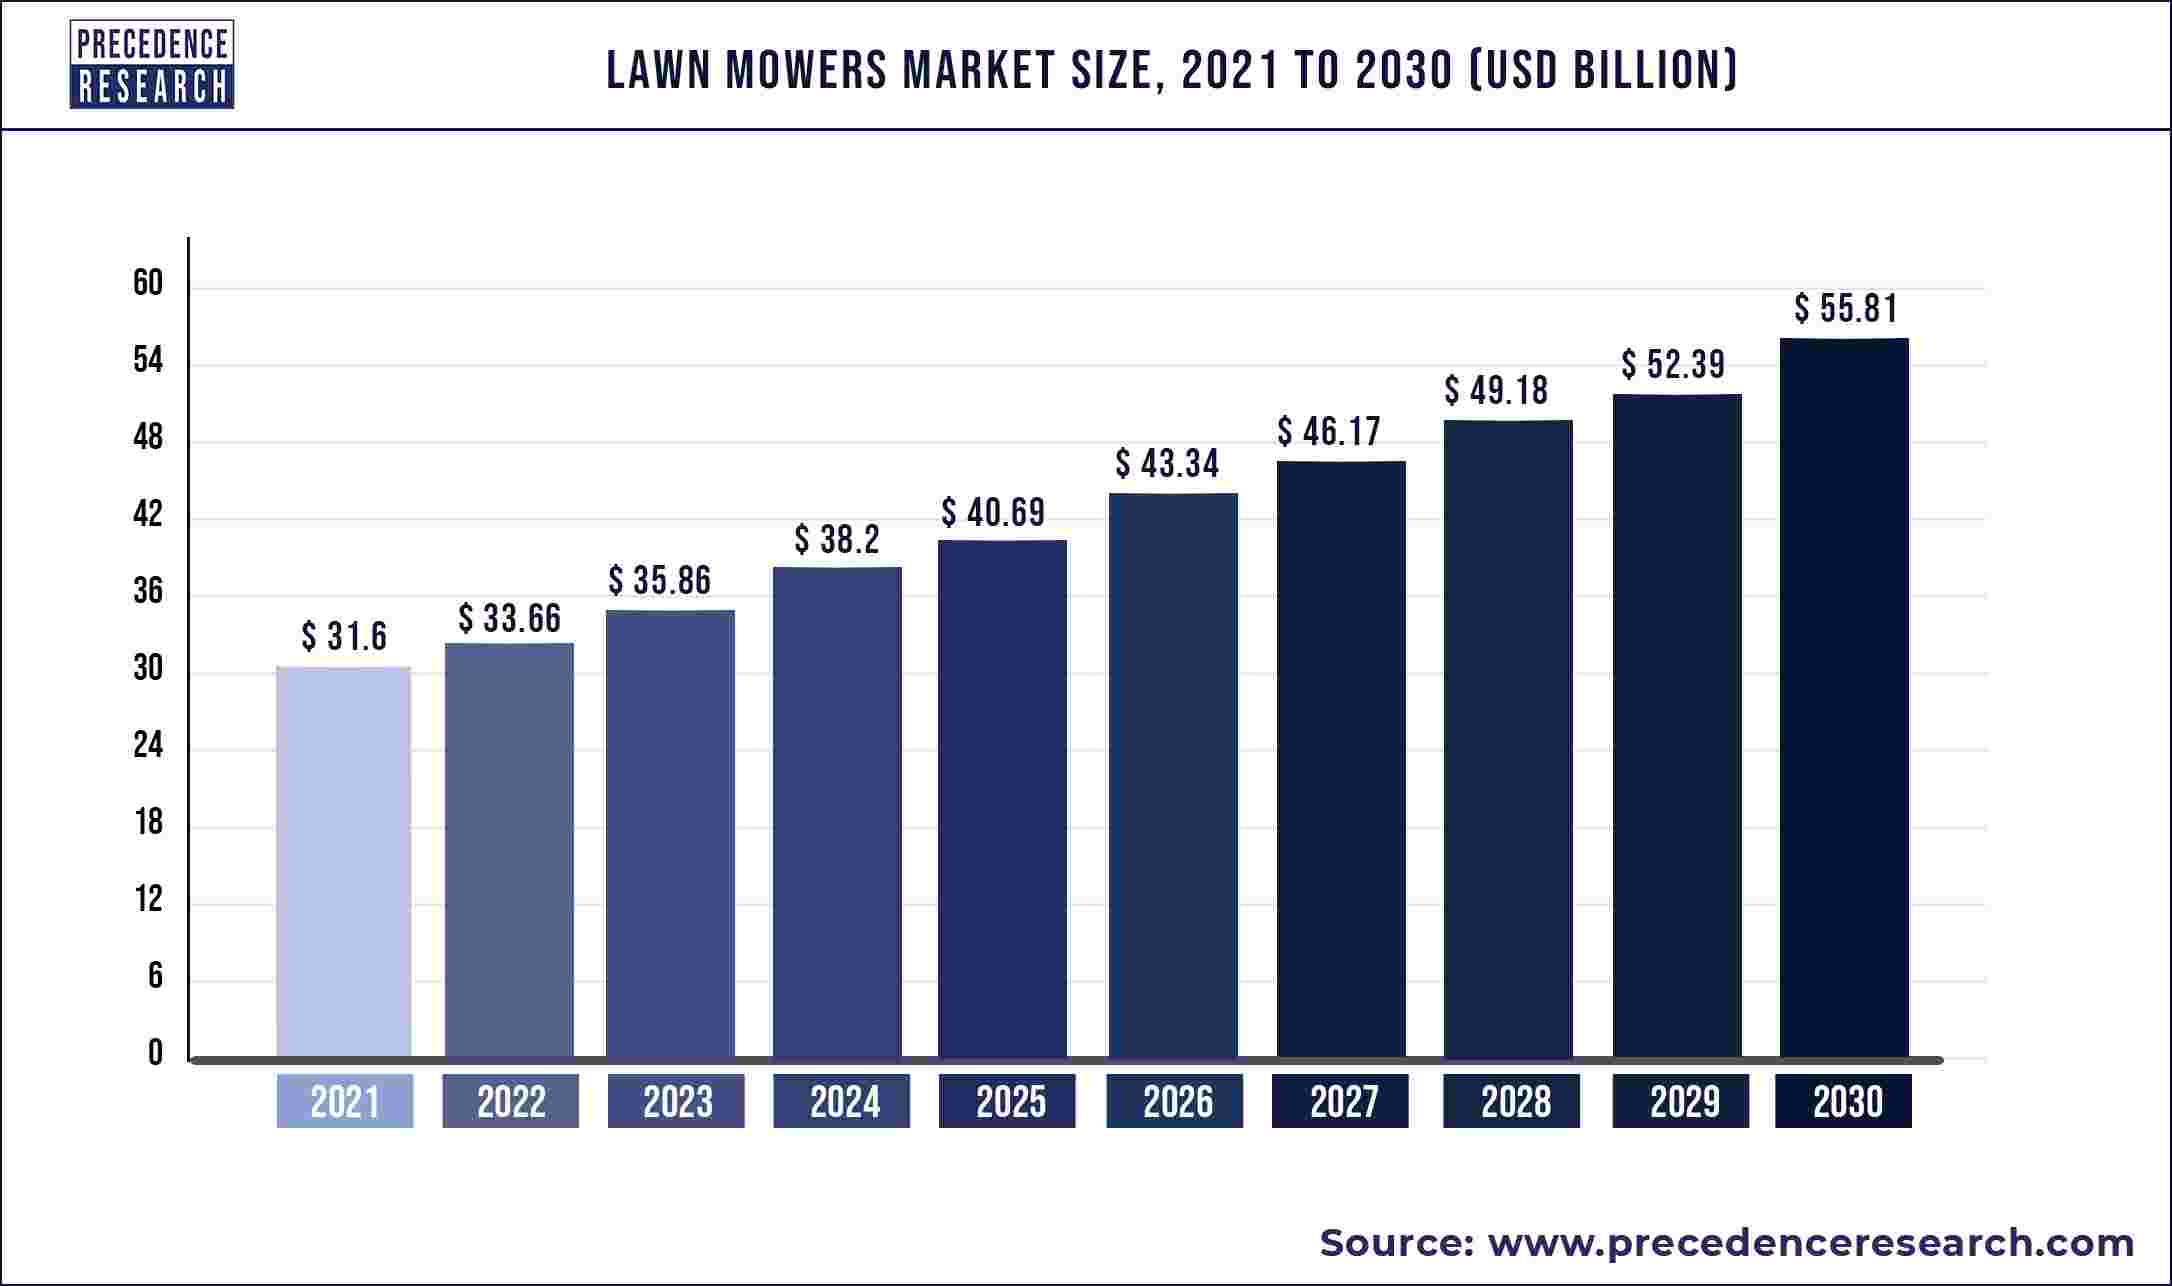 Lawn Mowers Market Size is Forecasted to Reach US$ 55.81 Billion by 2030